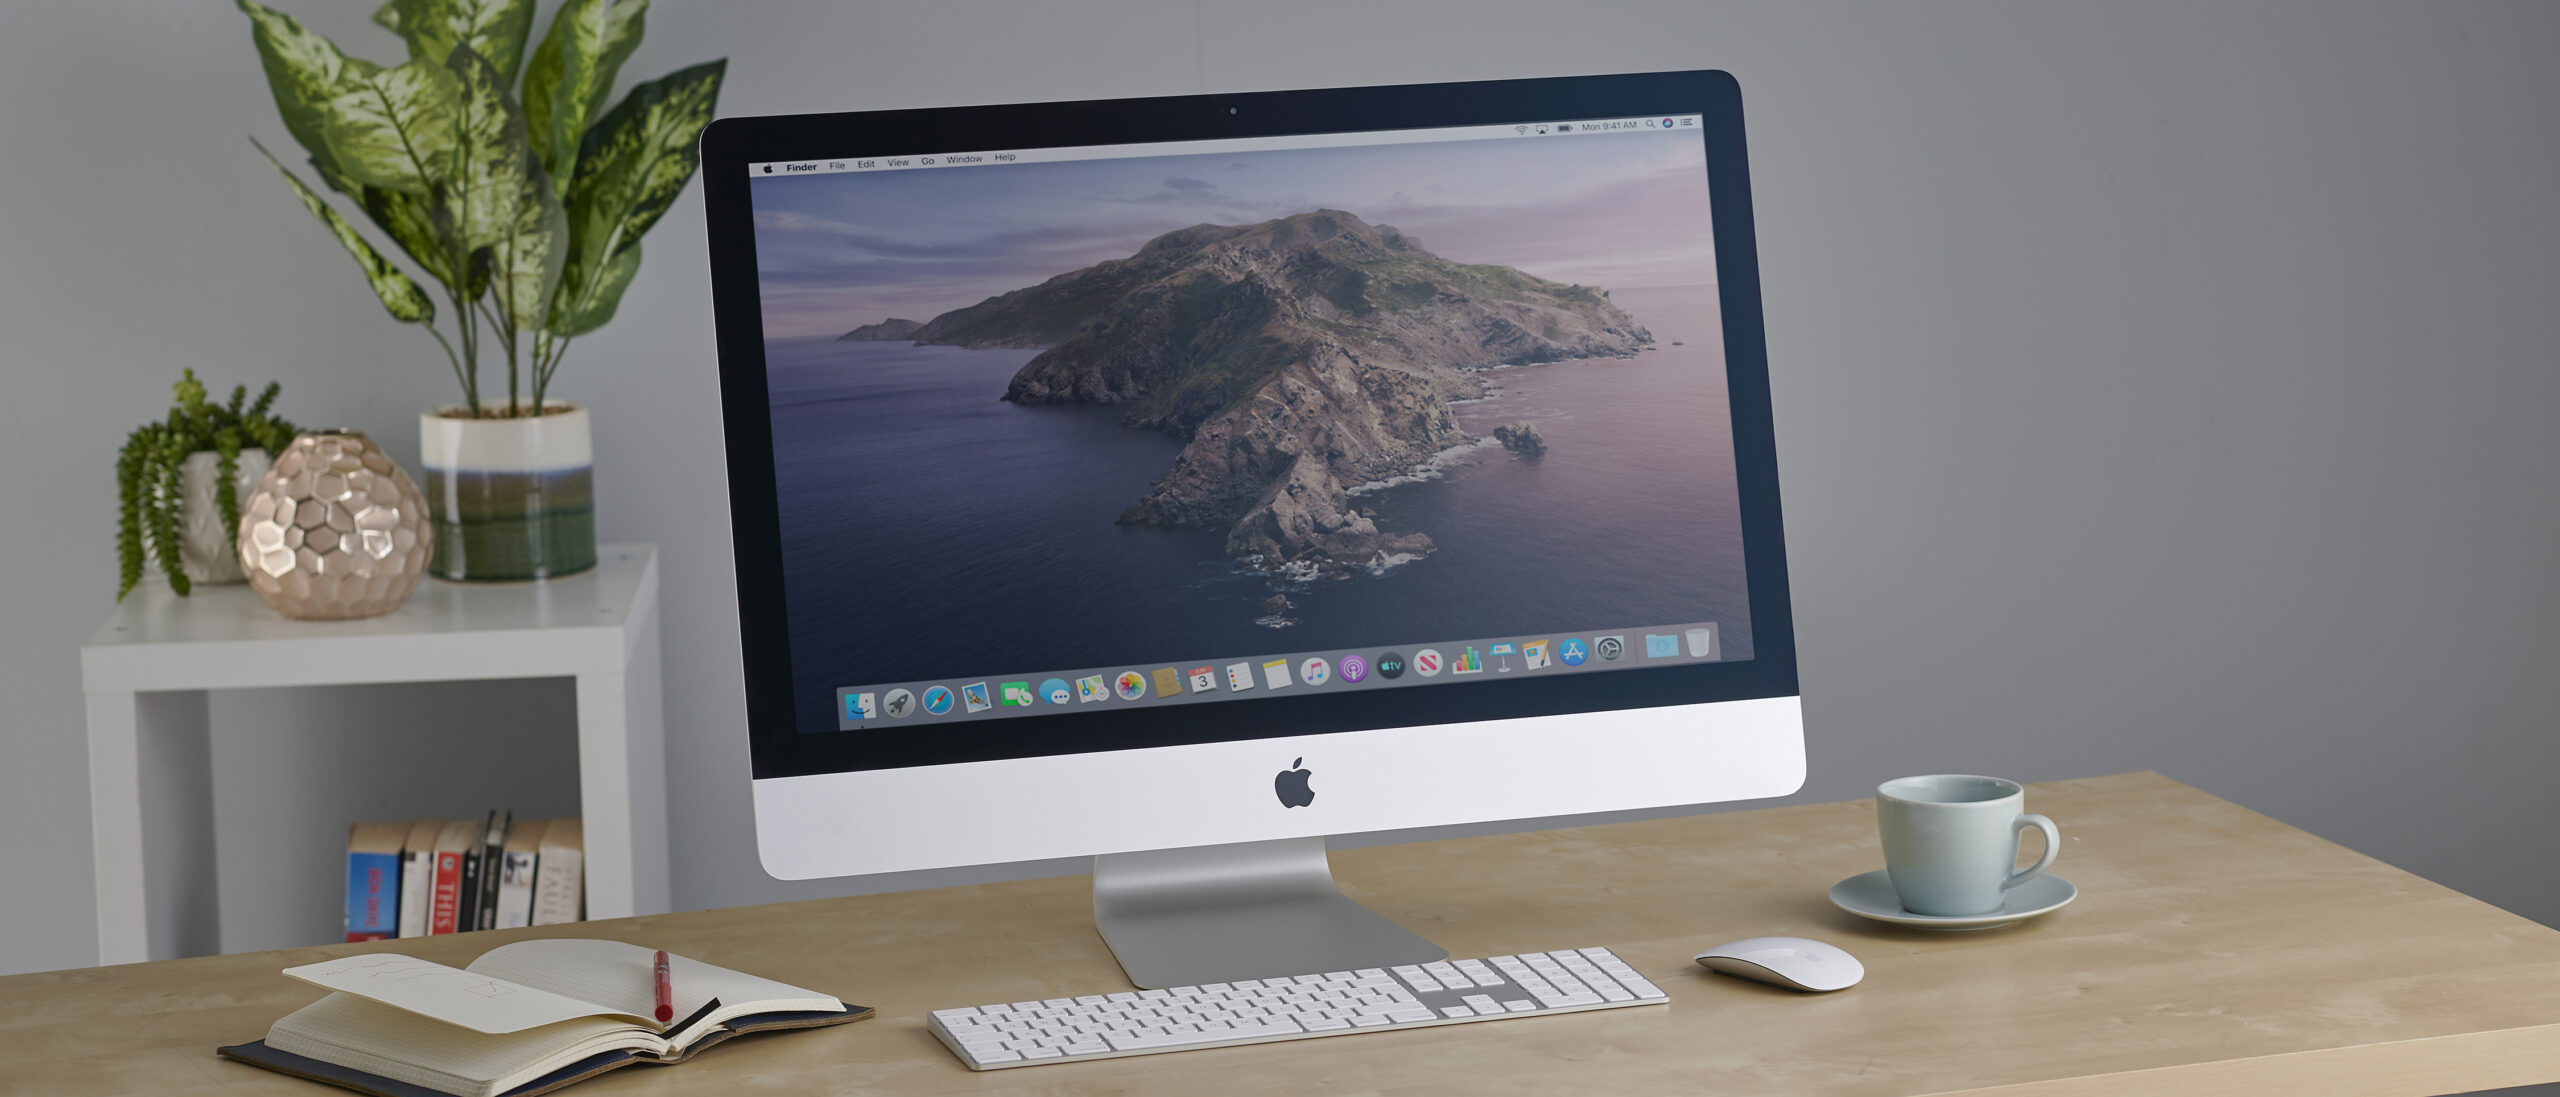 A-Brief-Look-at-the-I7-4K-iMac-Pro-scaled